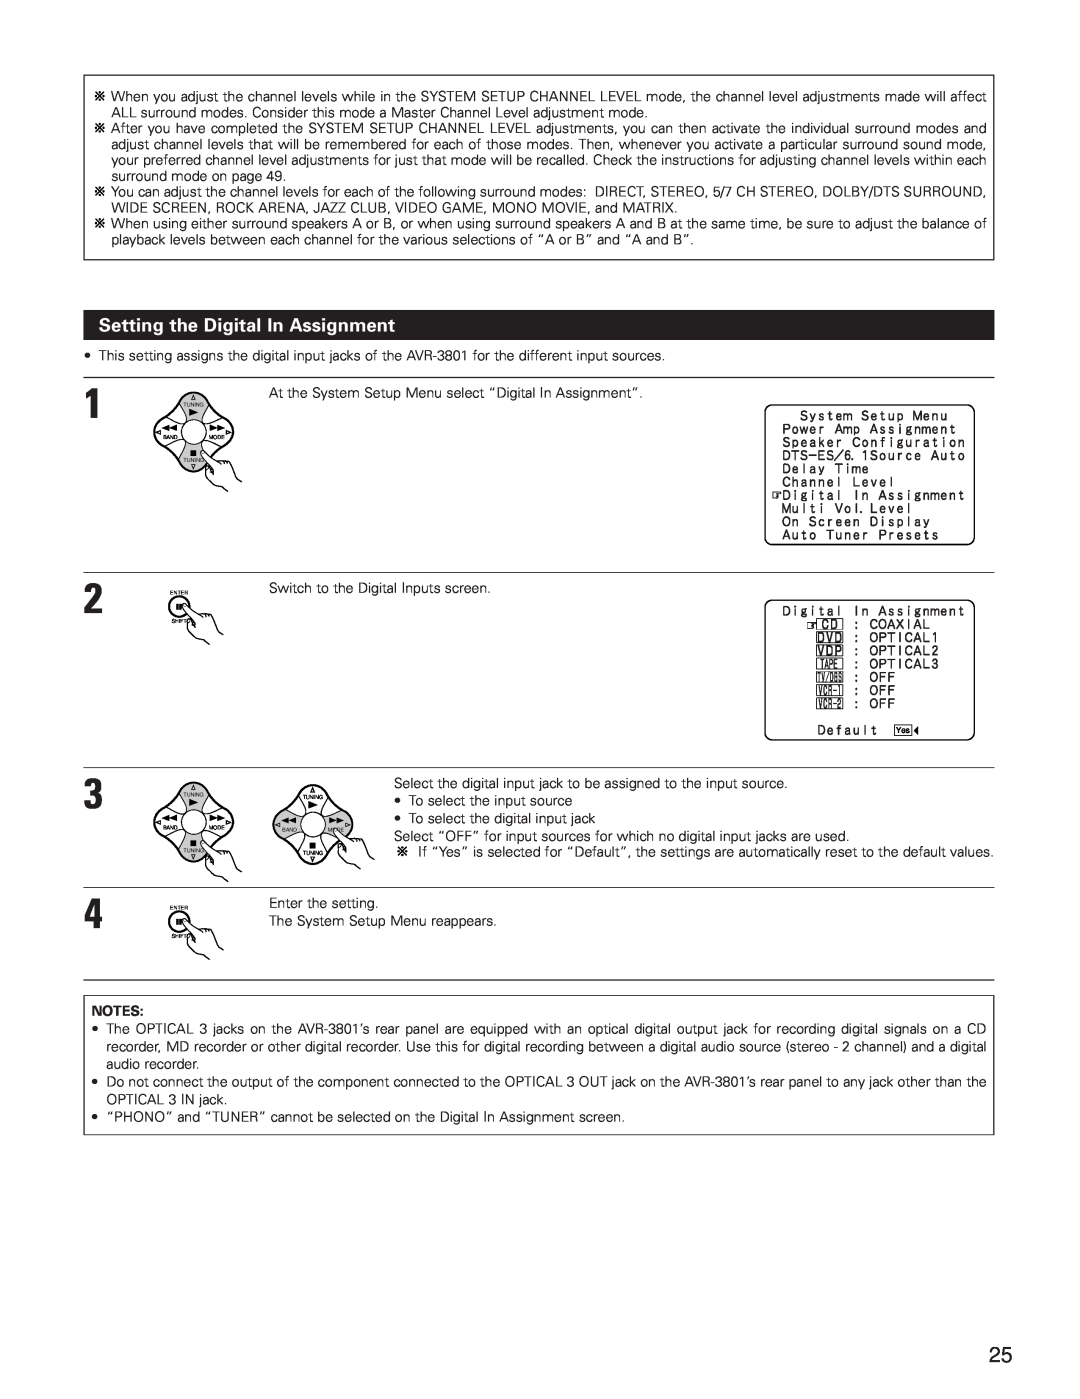 Denon AVR-3801 manual Setting the Digital In Assignment 